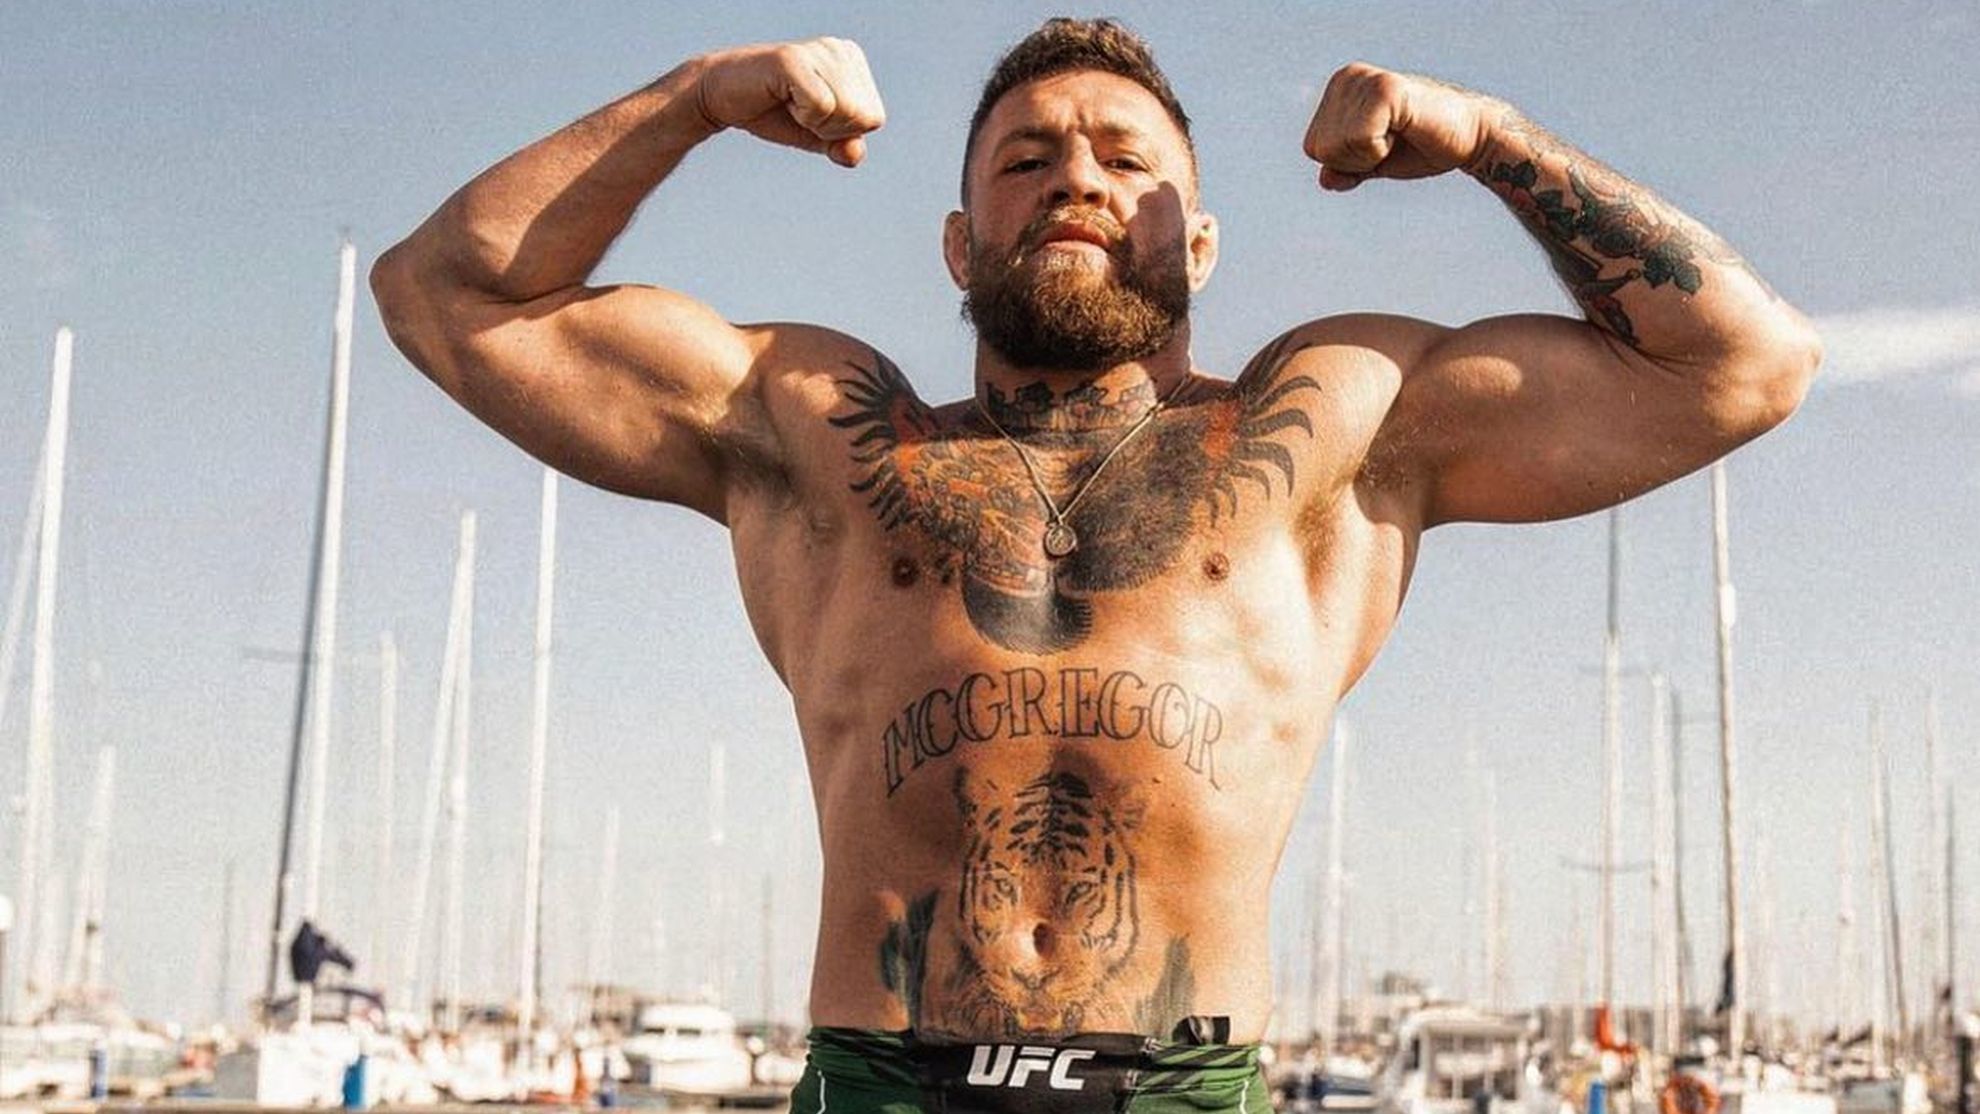 Conor McGregor's Epic Journey The Hurdles and Hopes of His UFC Comeback Story--